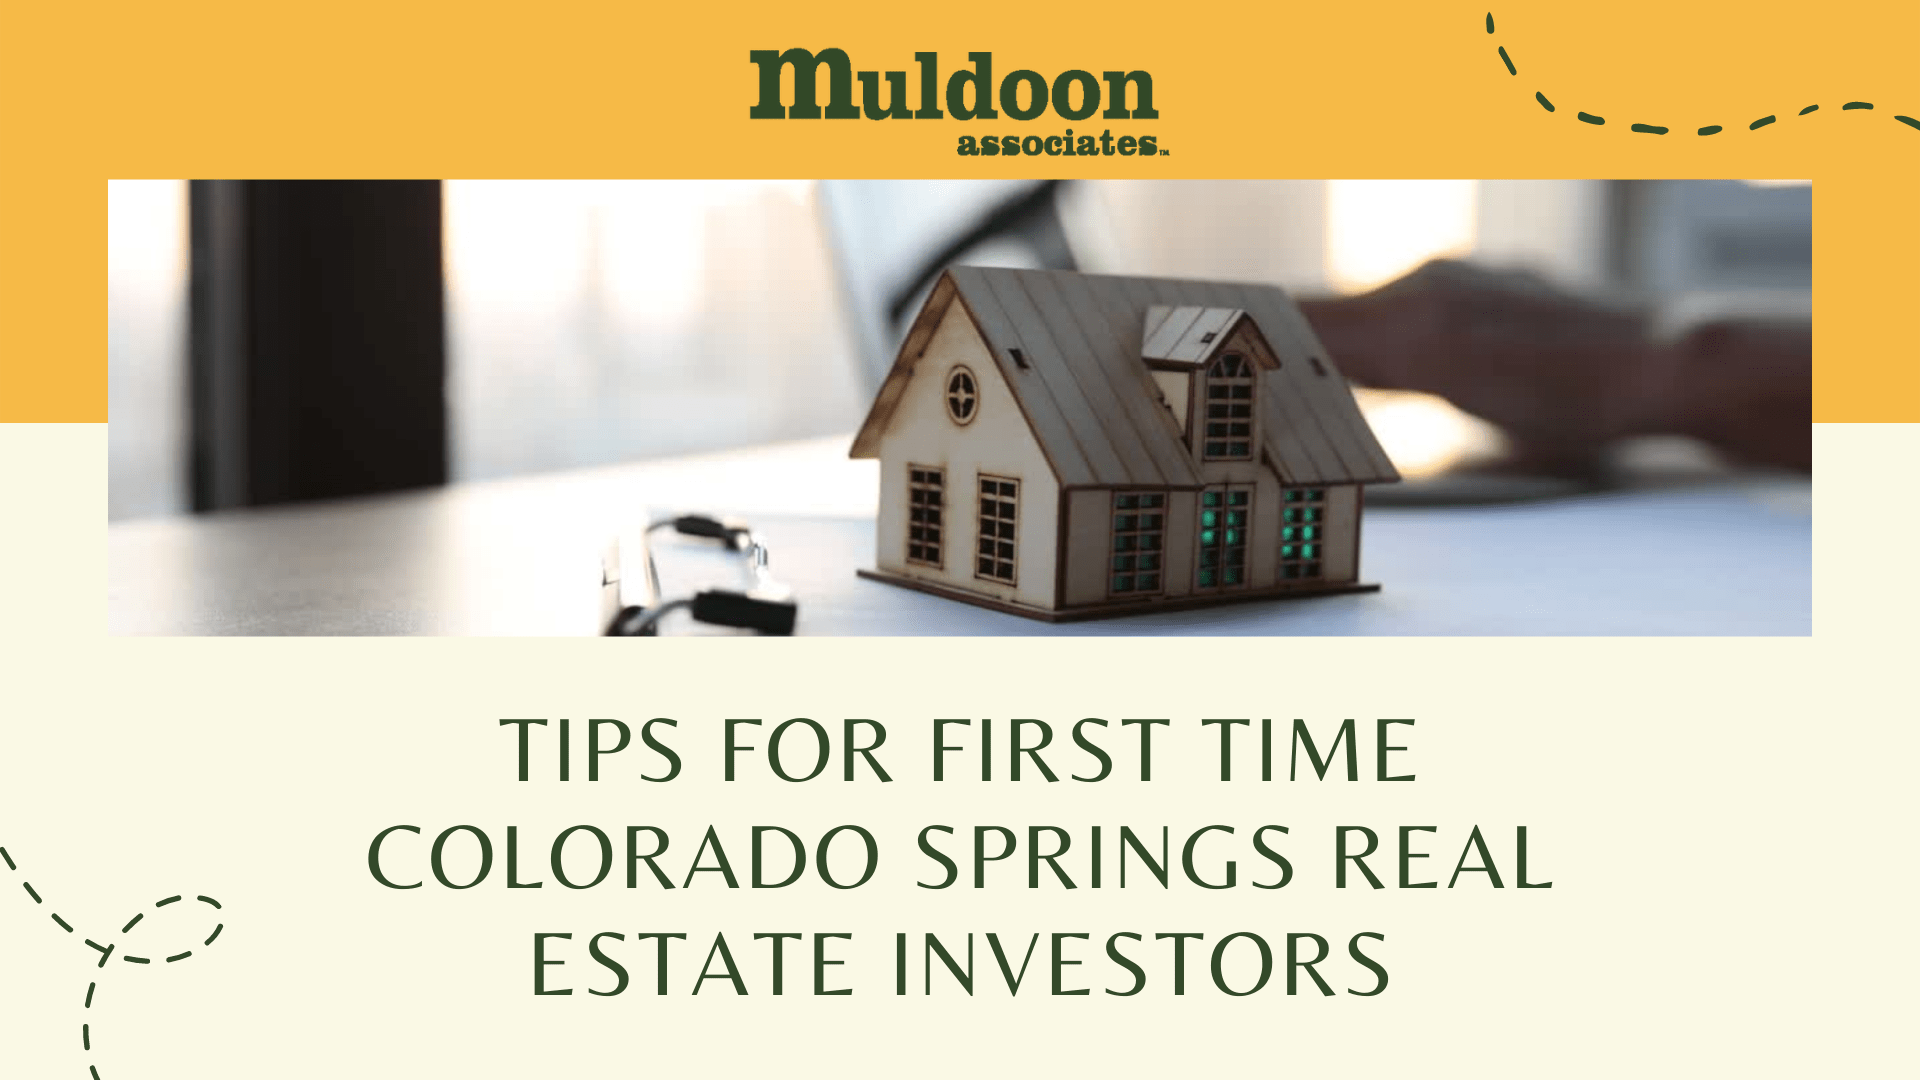 Tips for First Time Colorado Springs Real Estate Investors